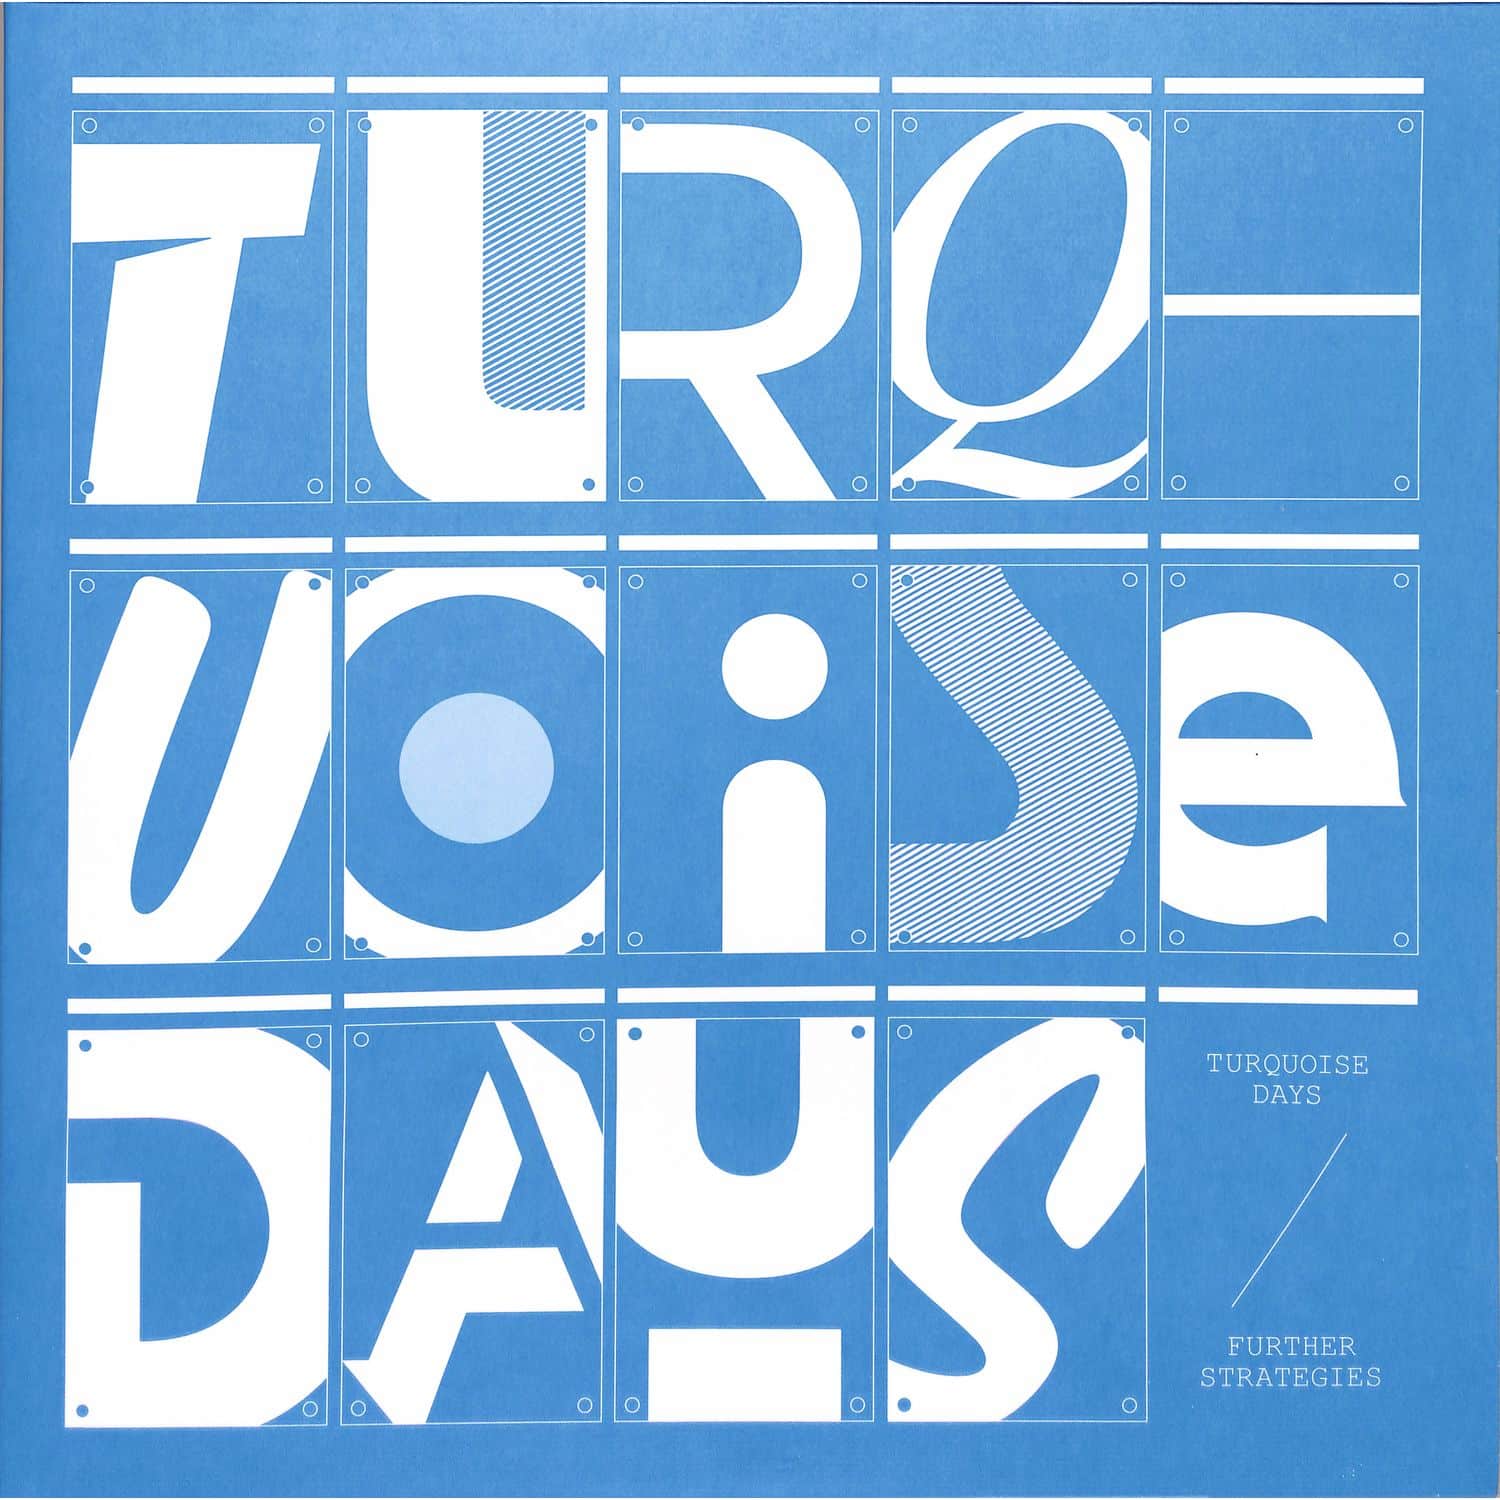 Turquoise Days - FURTHER STRATEGIES 